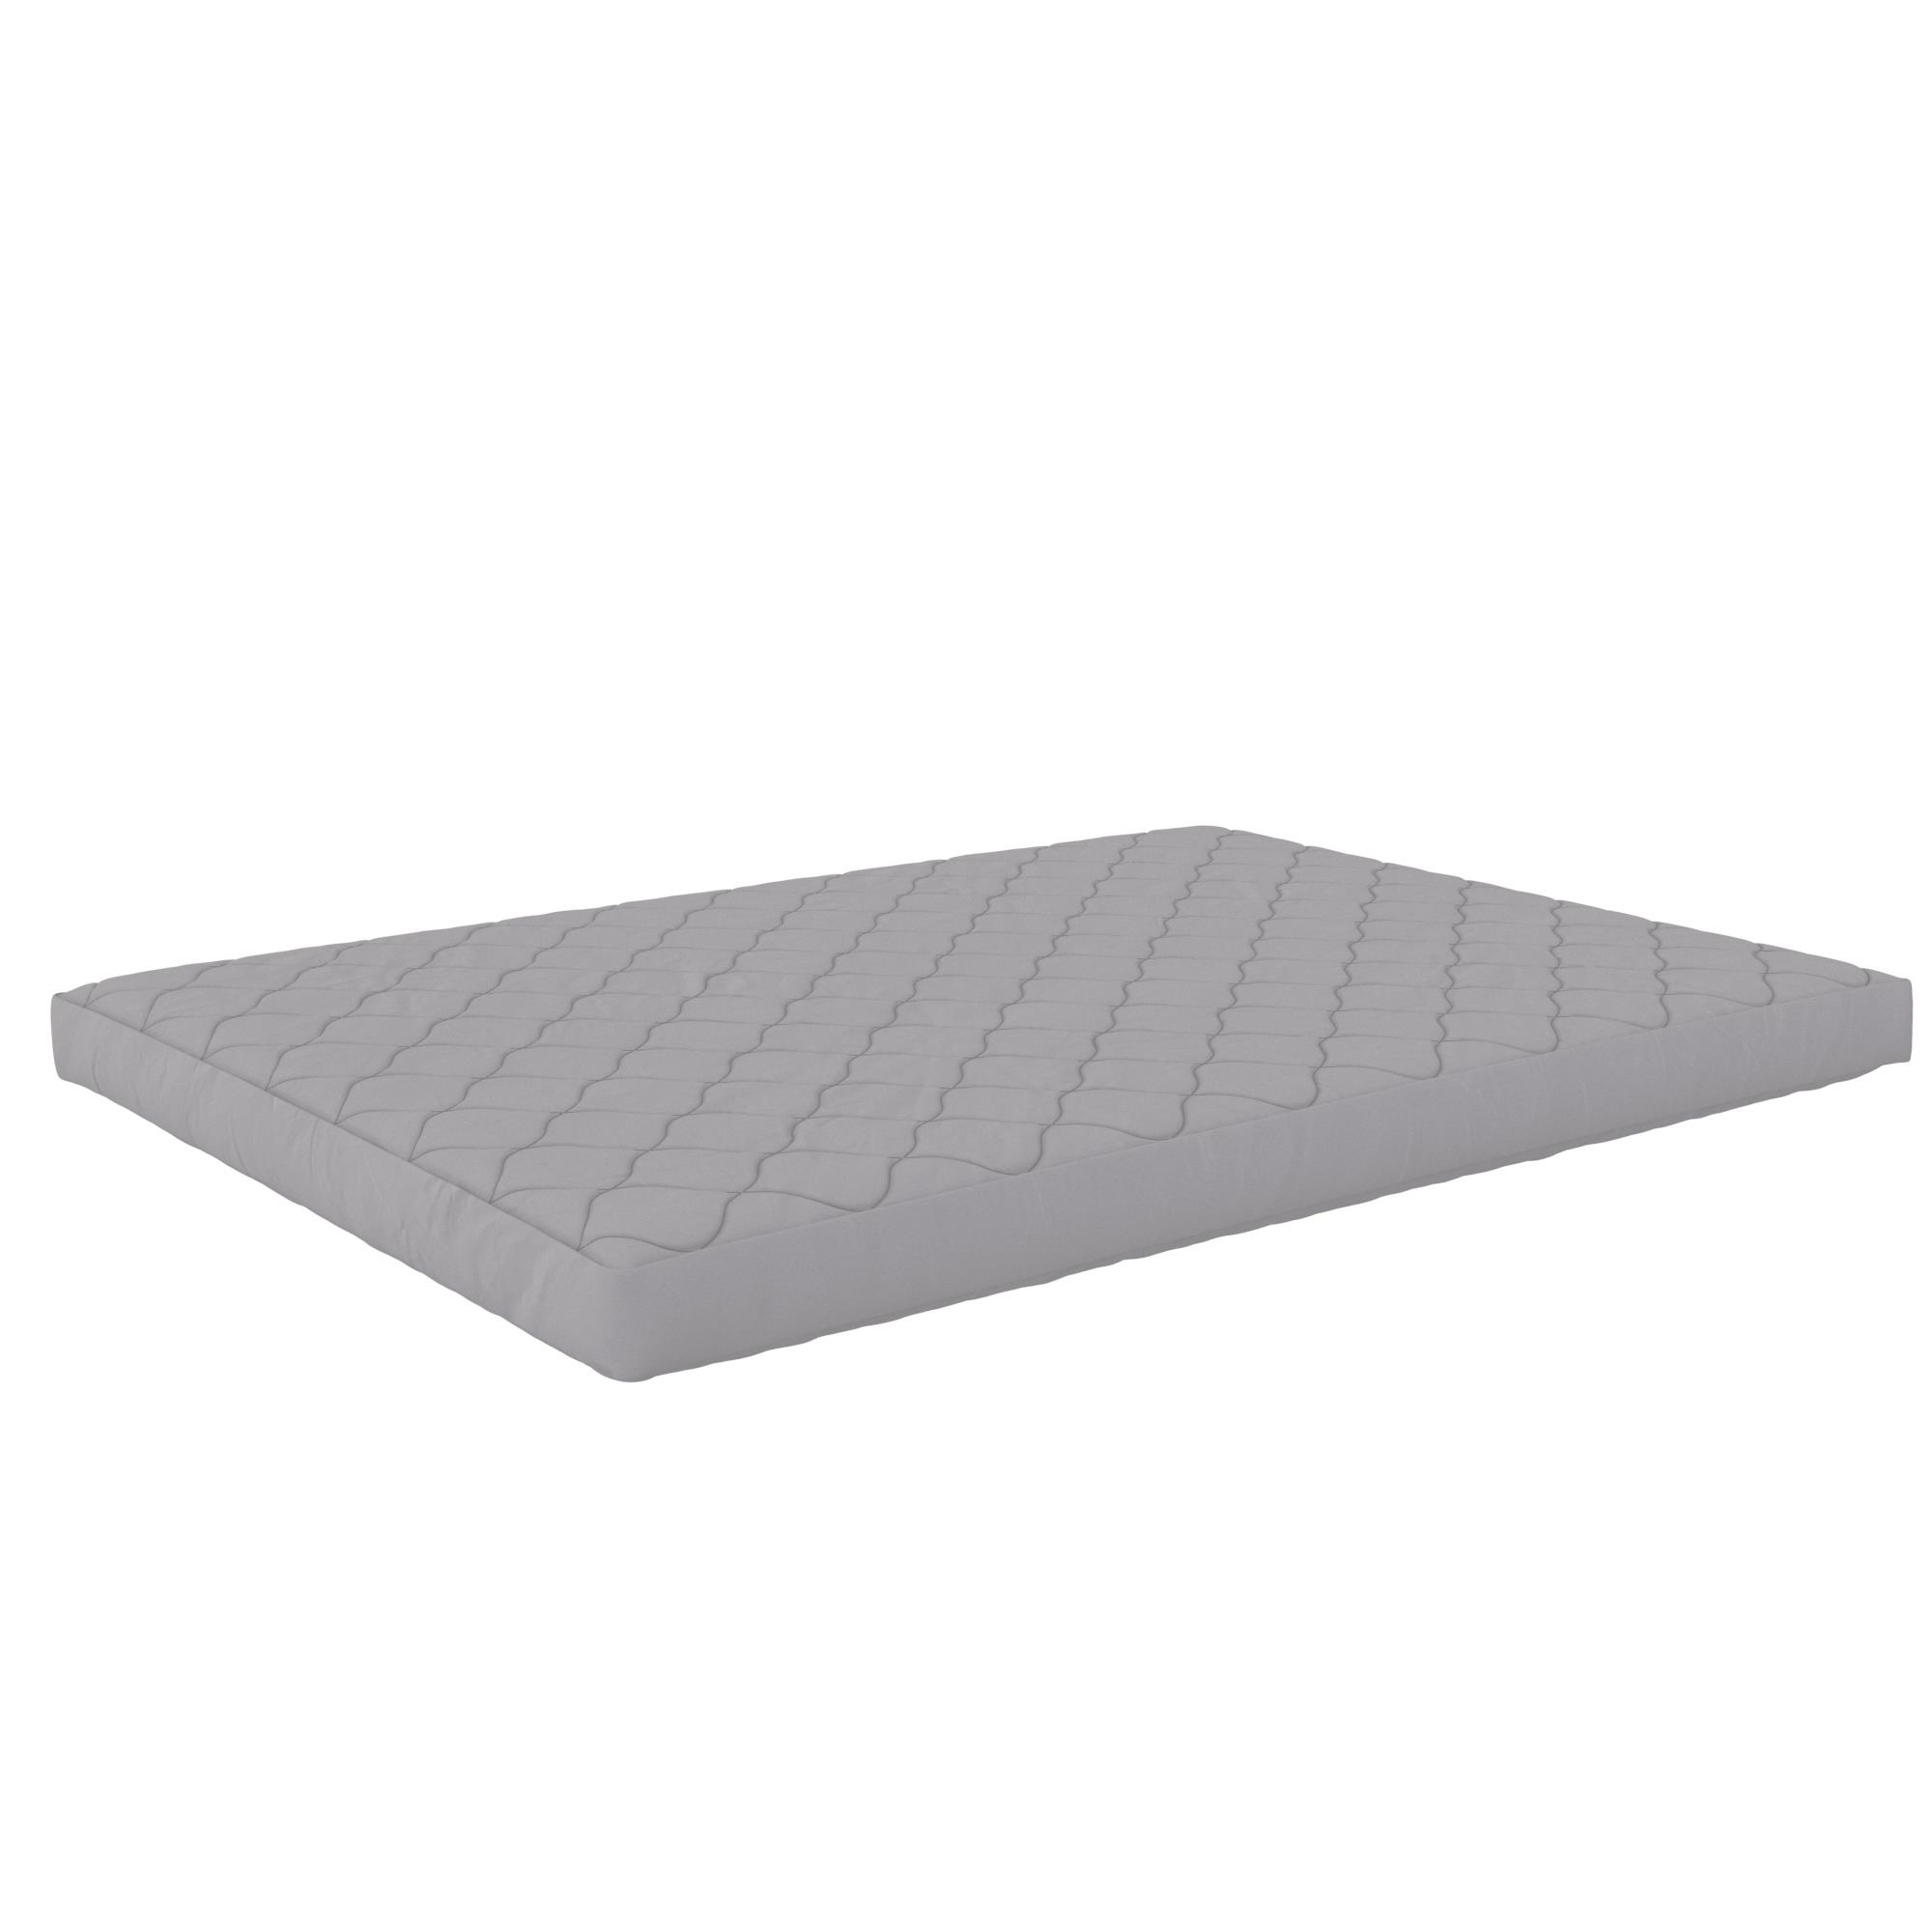 DHP Value 6 Inch Thermobonded Polyester Filled Quilted Top Bunk Bed Mattress, Full, Gray - image 3 of 8